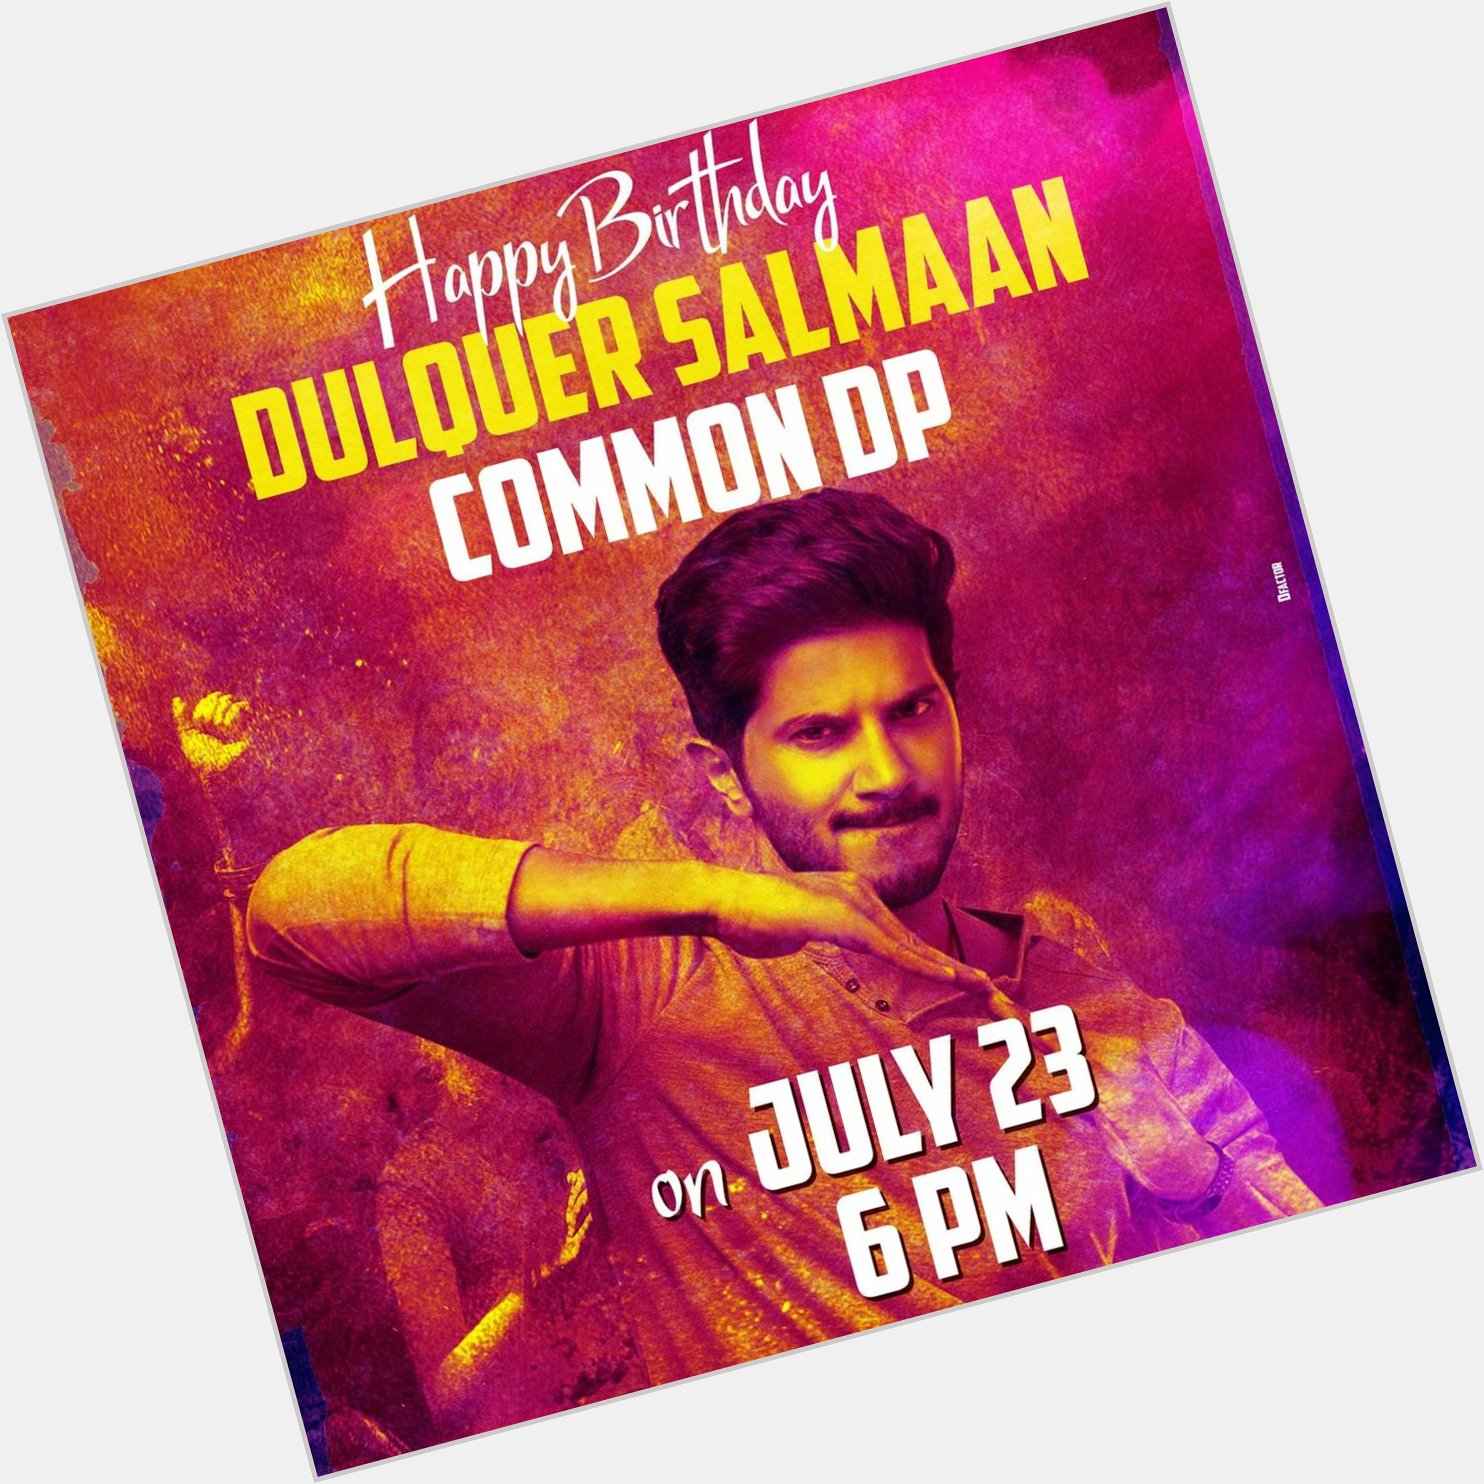 Get Ready DQ Fans !!
Happy Birthday DulQuer Salmaan Common Dp On July23 . 